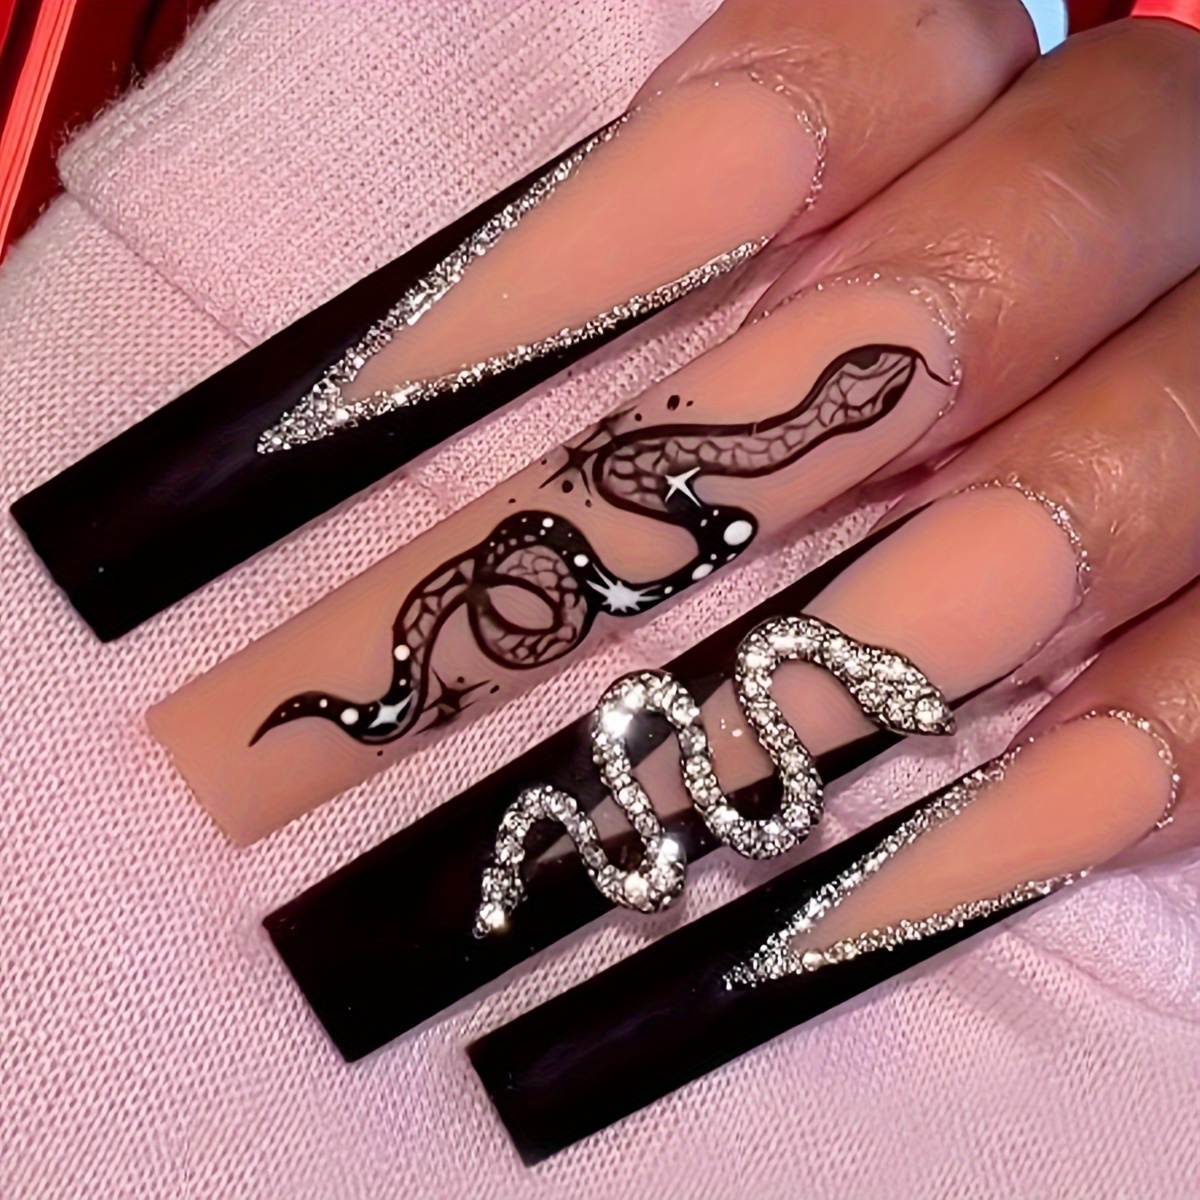 

24pcs Glossy Long Square Fake Nails, Black French Tip Press On Nails With Silvery Glitter And 3d Snake Design, Sweet Cool False Nails For Women Girls